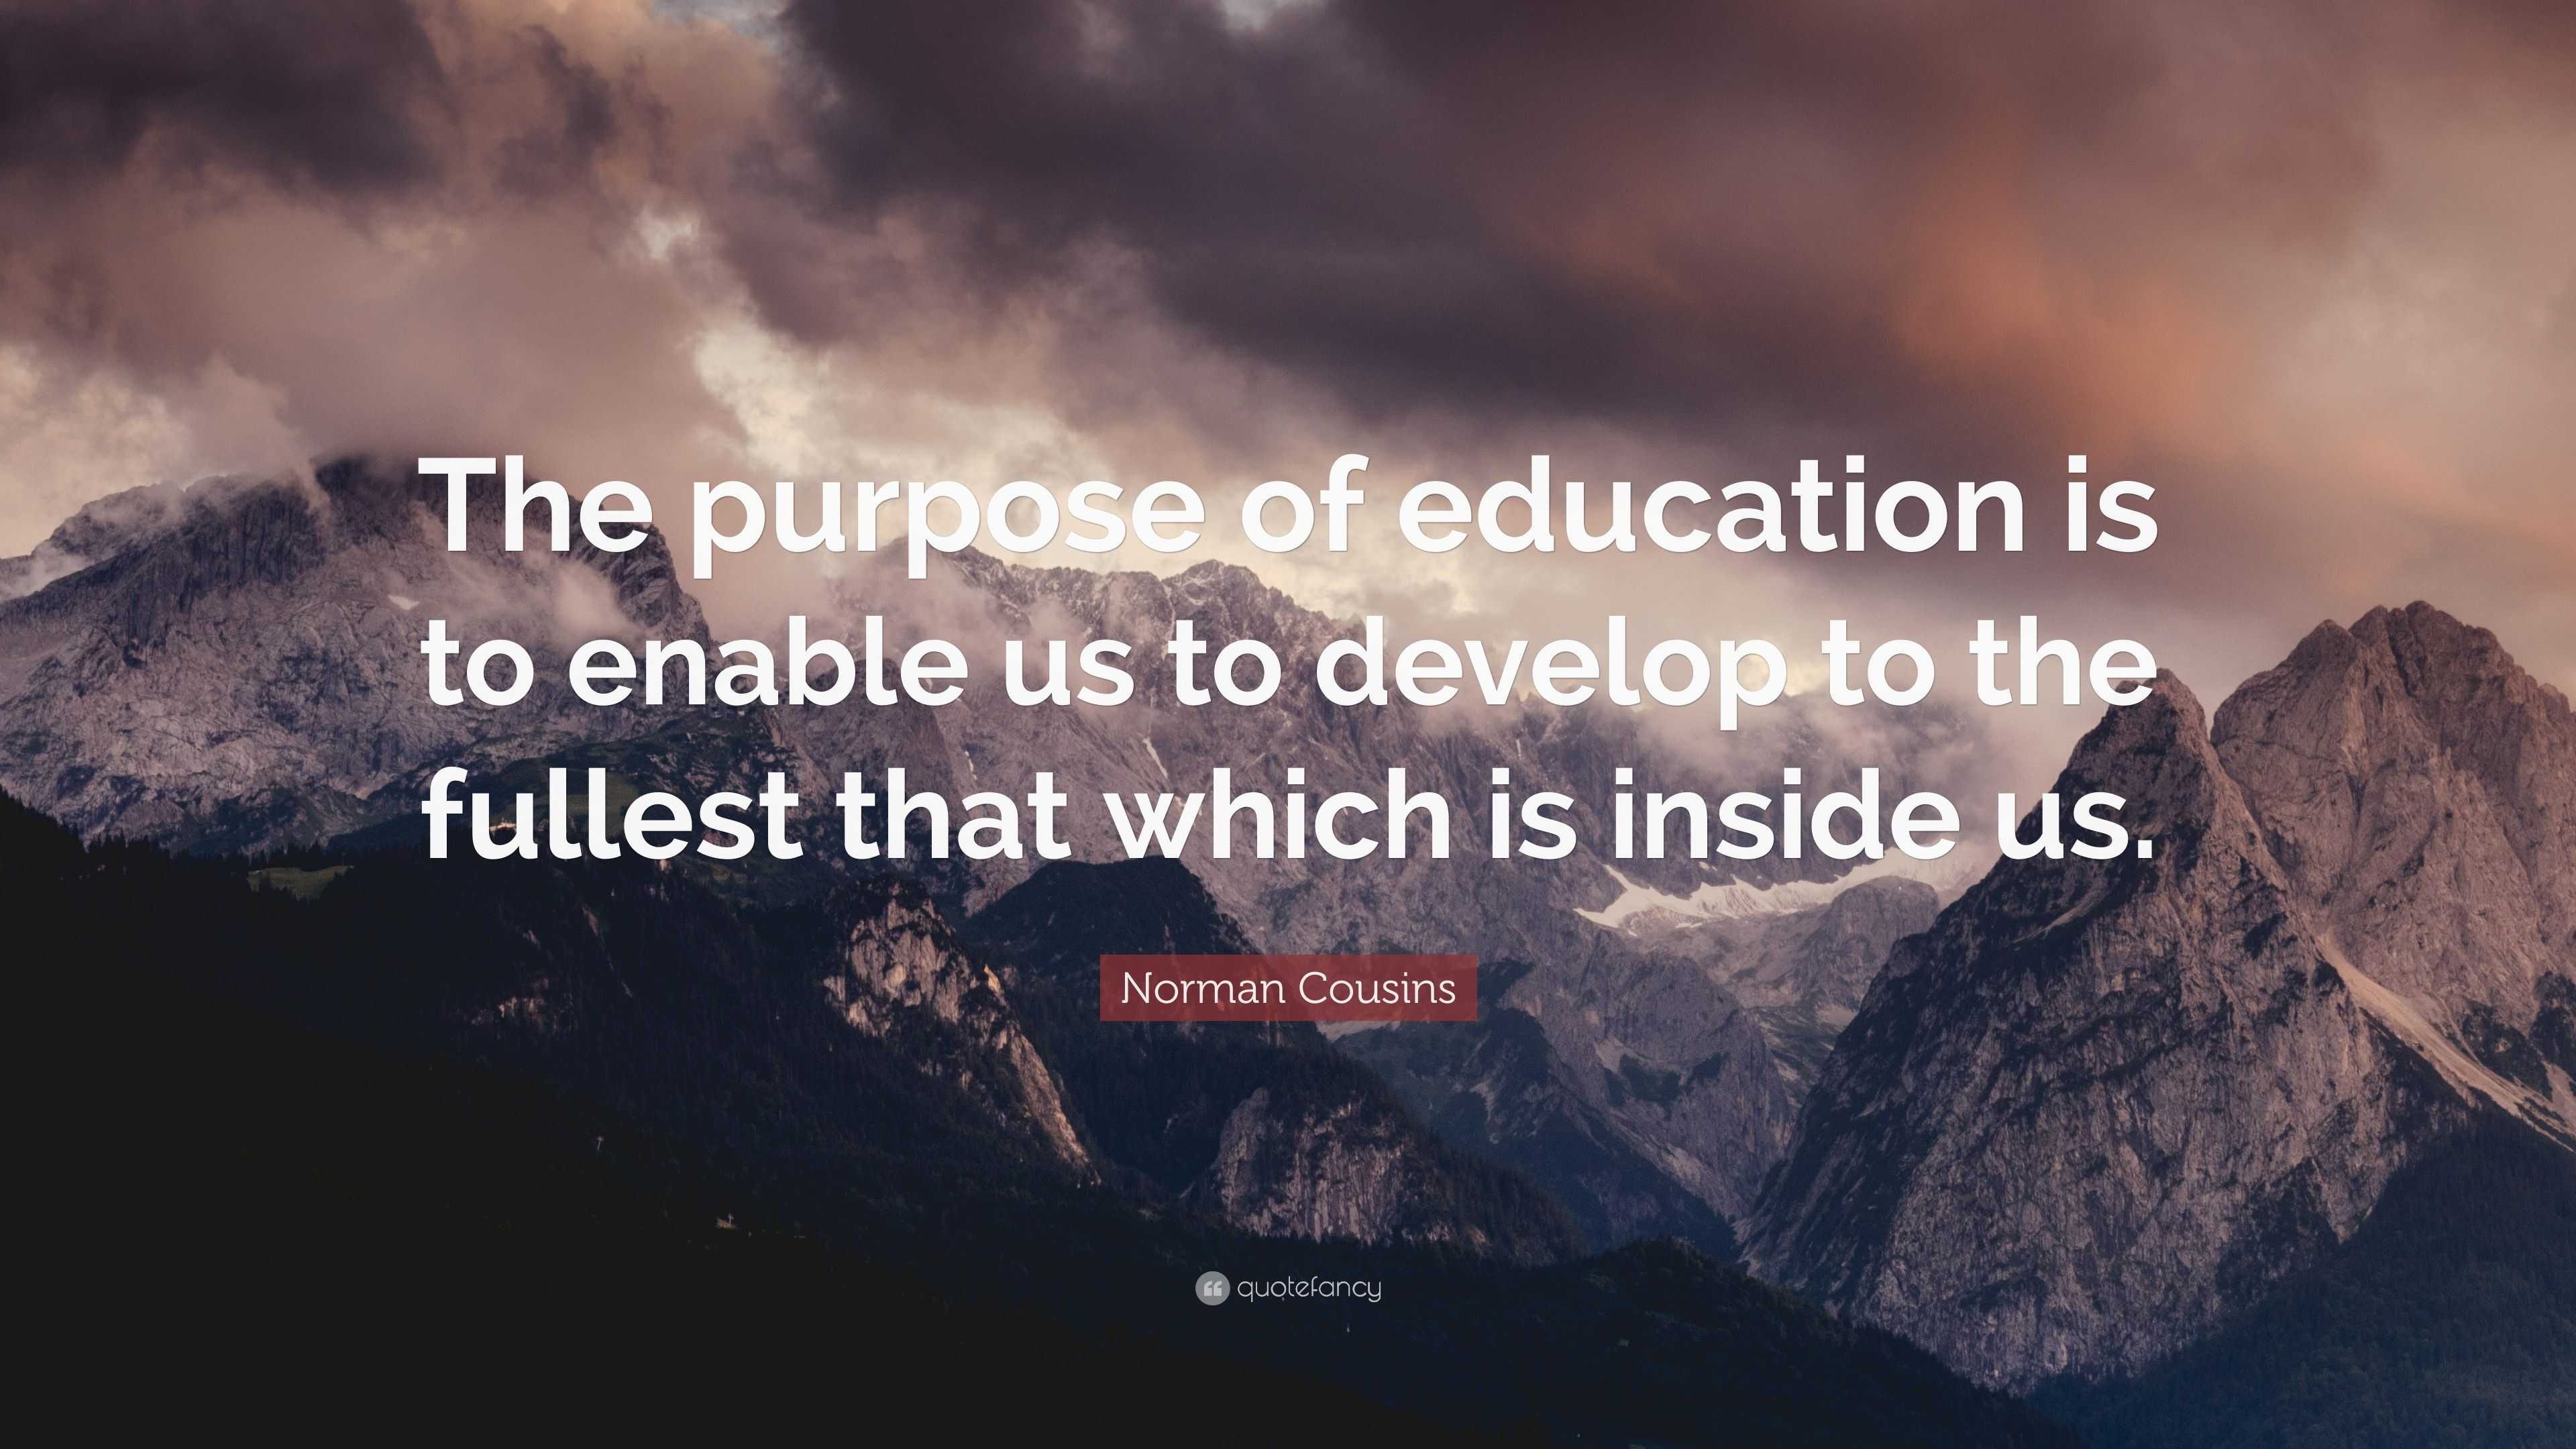 Norman Cousins Quote: “The purpose of education is to enable us to ...